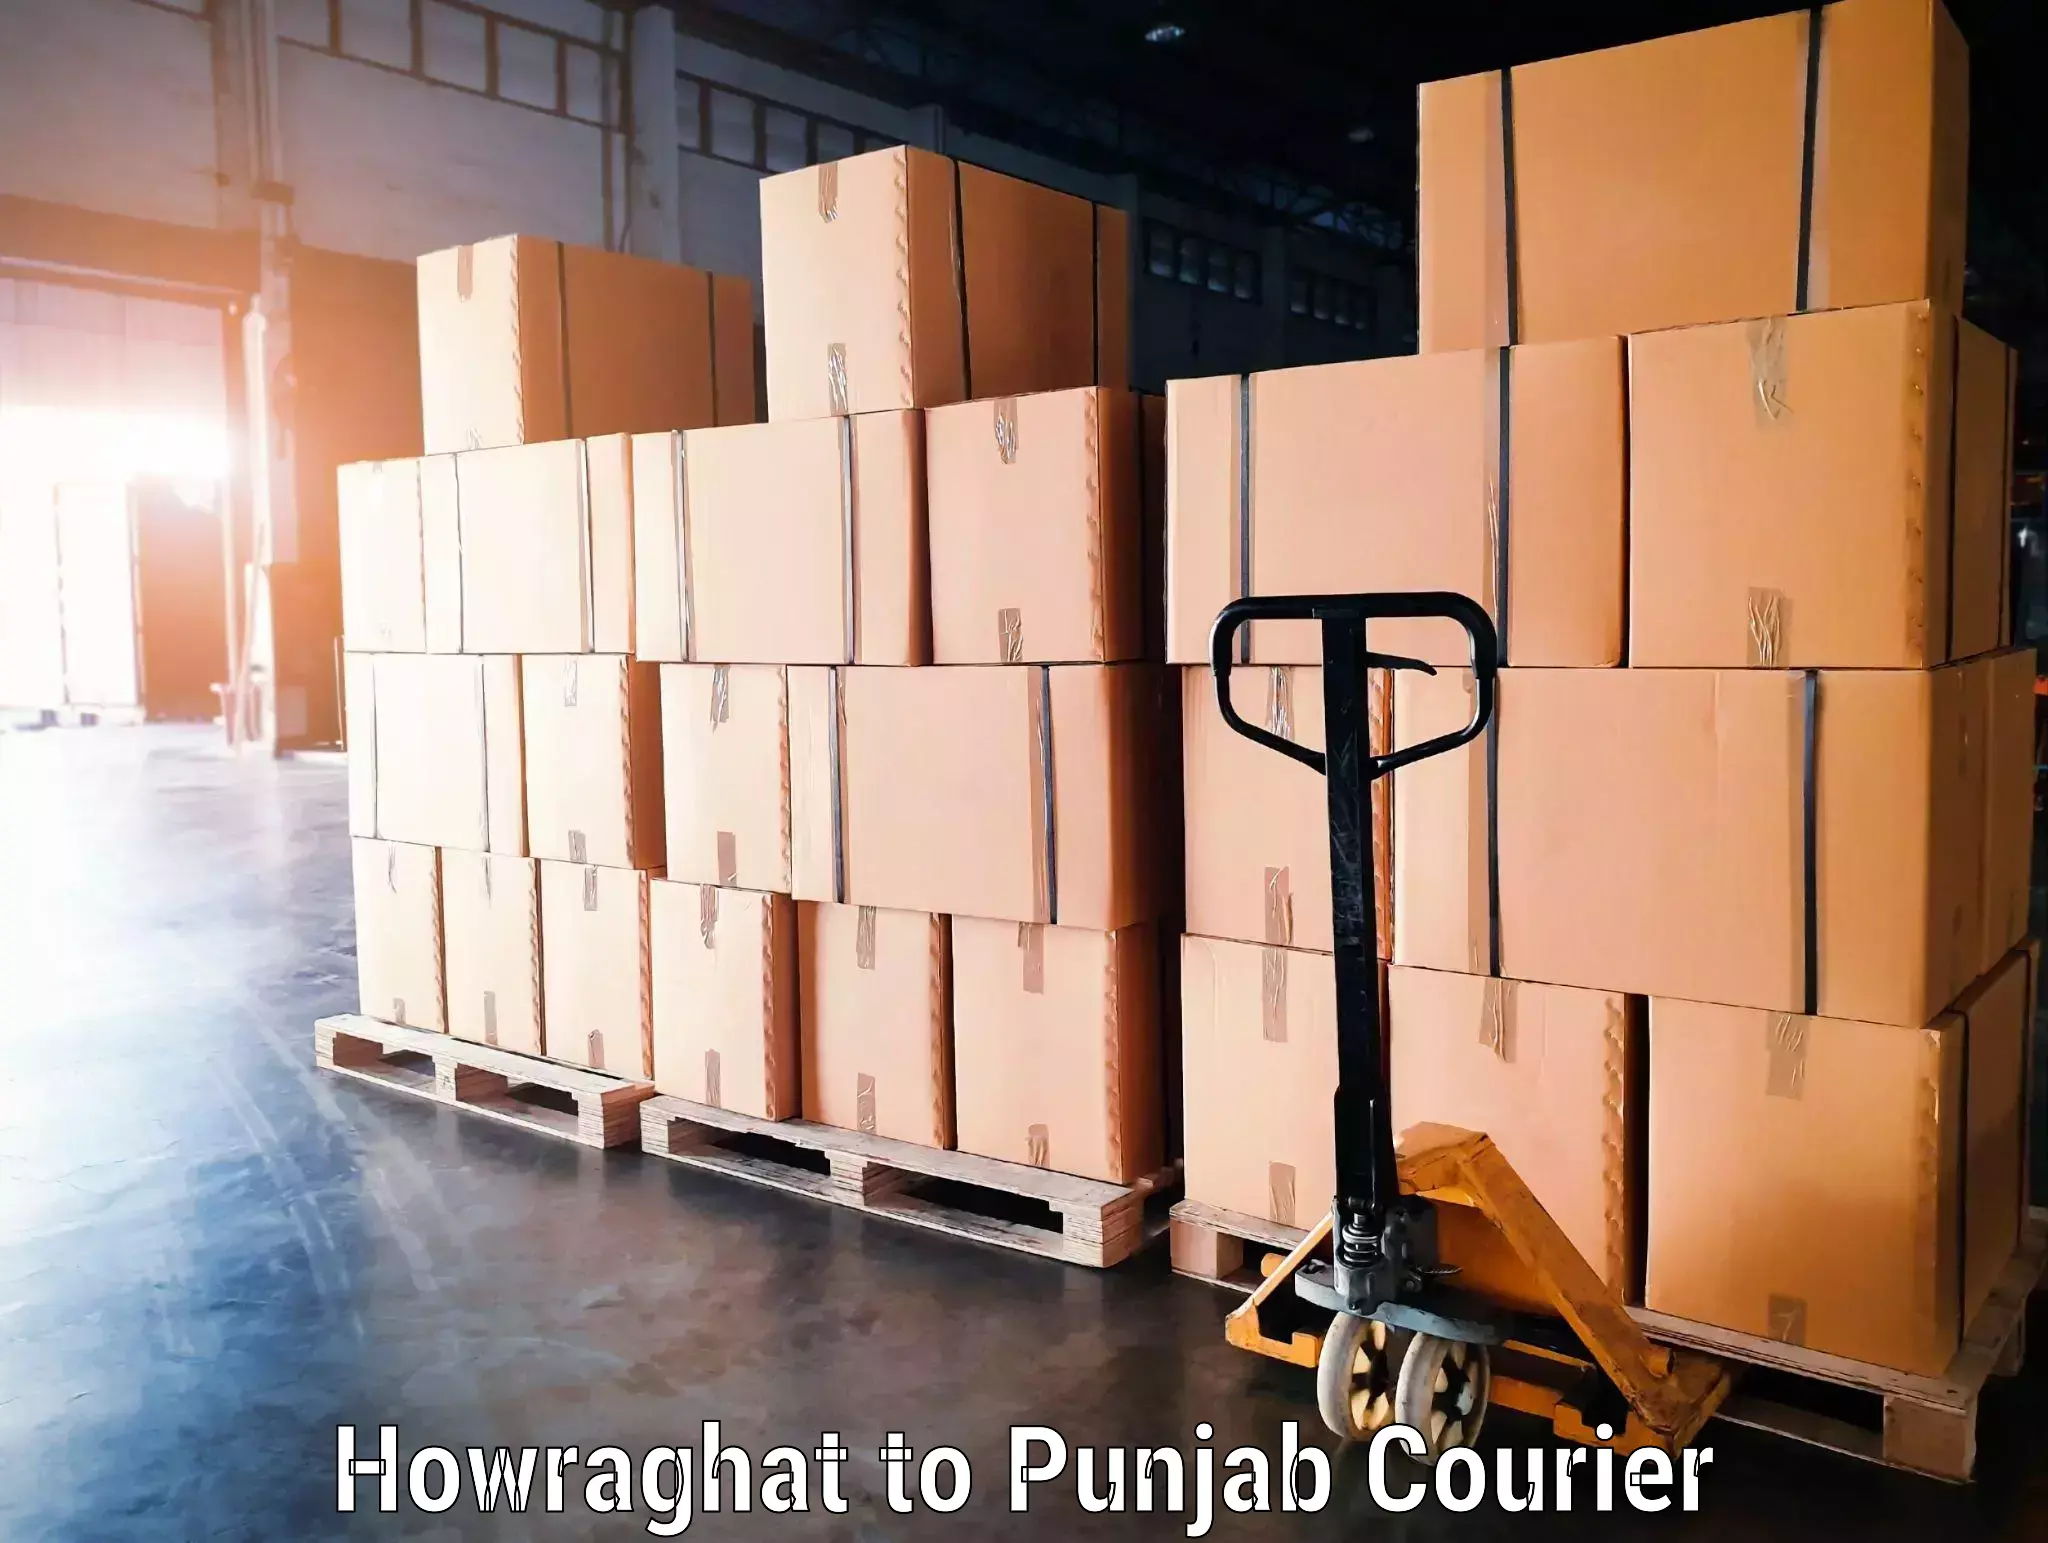 Luggage delivery system Howraghat to Dinanagar